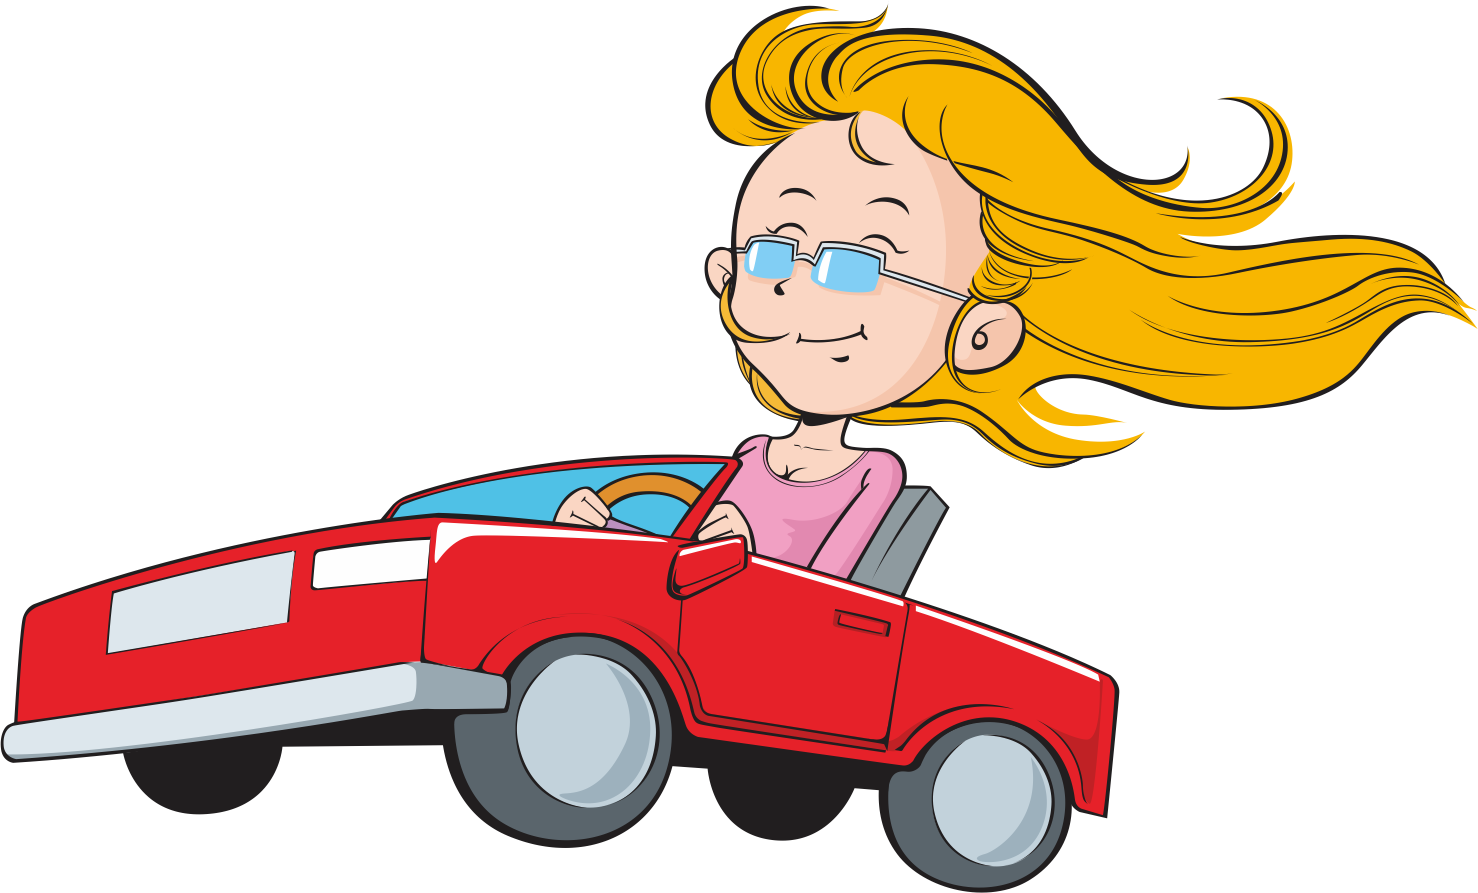 Download and share clipart about Car Driving Transprent Png Free Download -...